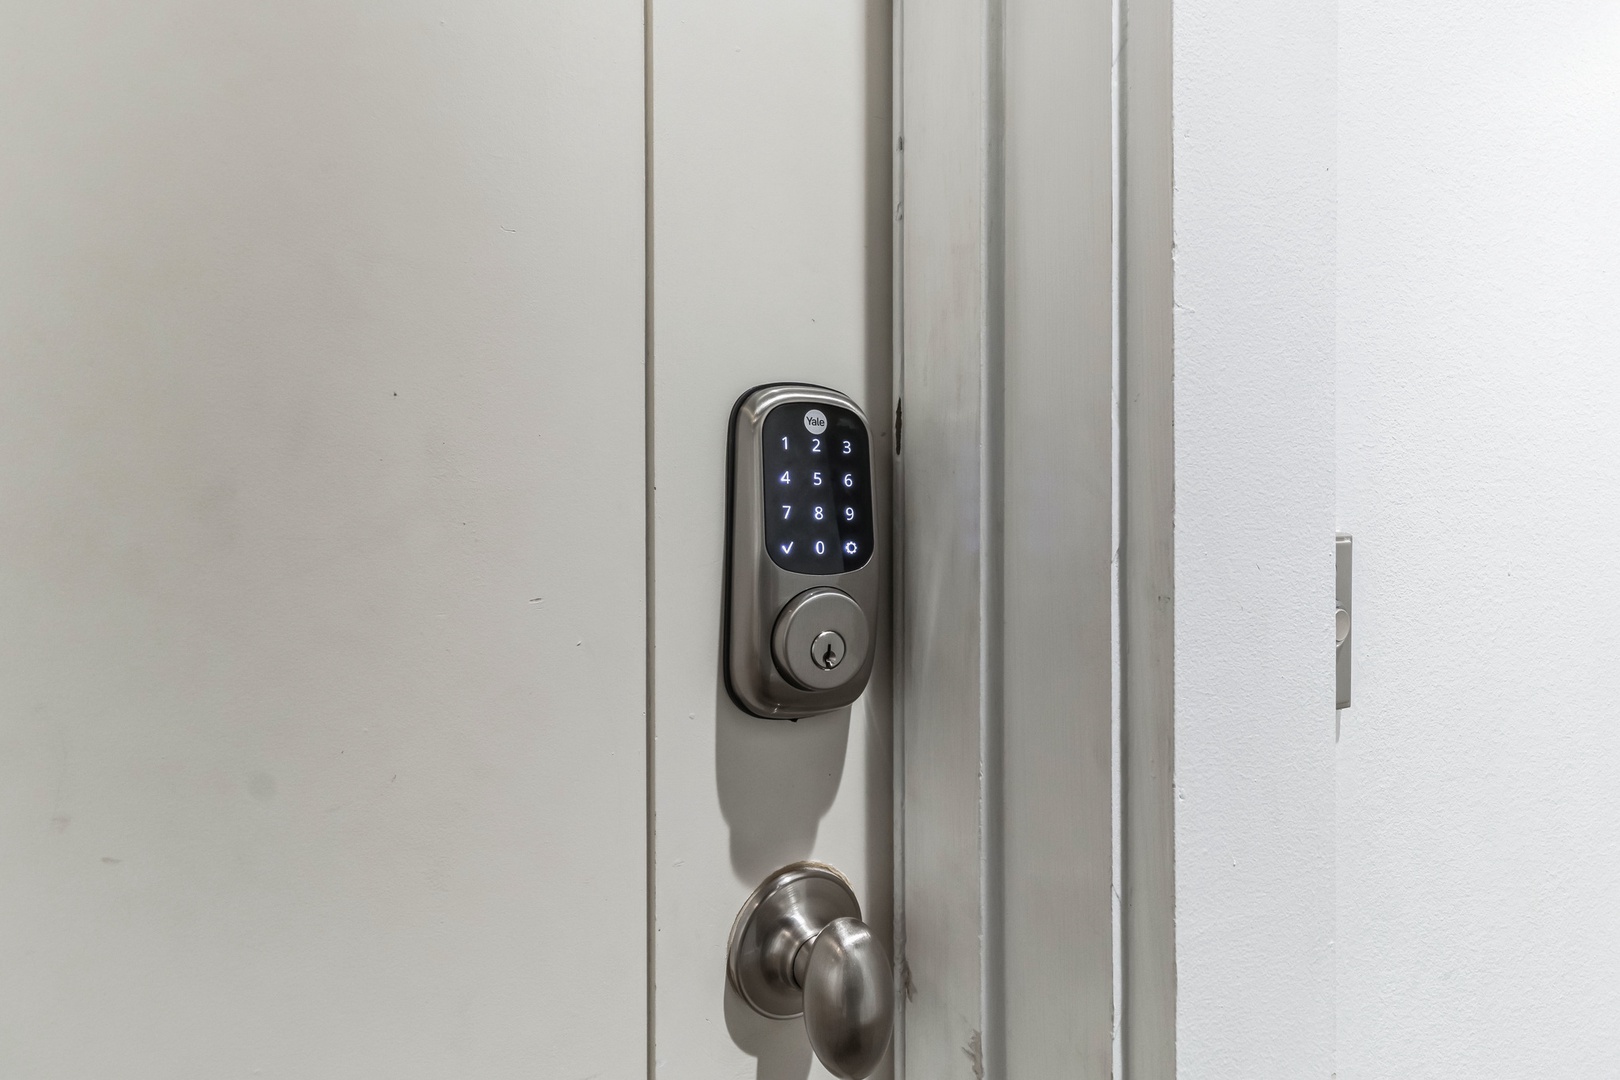 Convenient keyless entry for hassle-free access